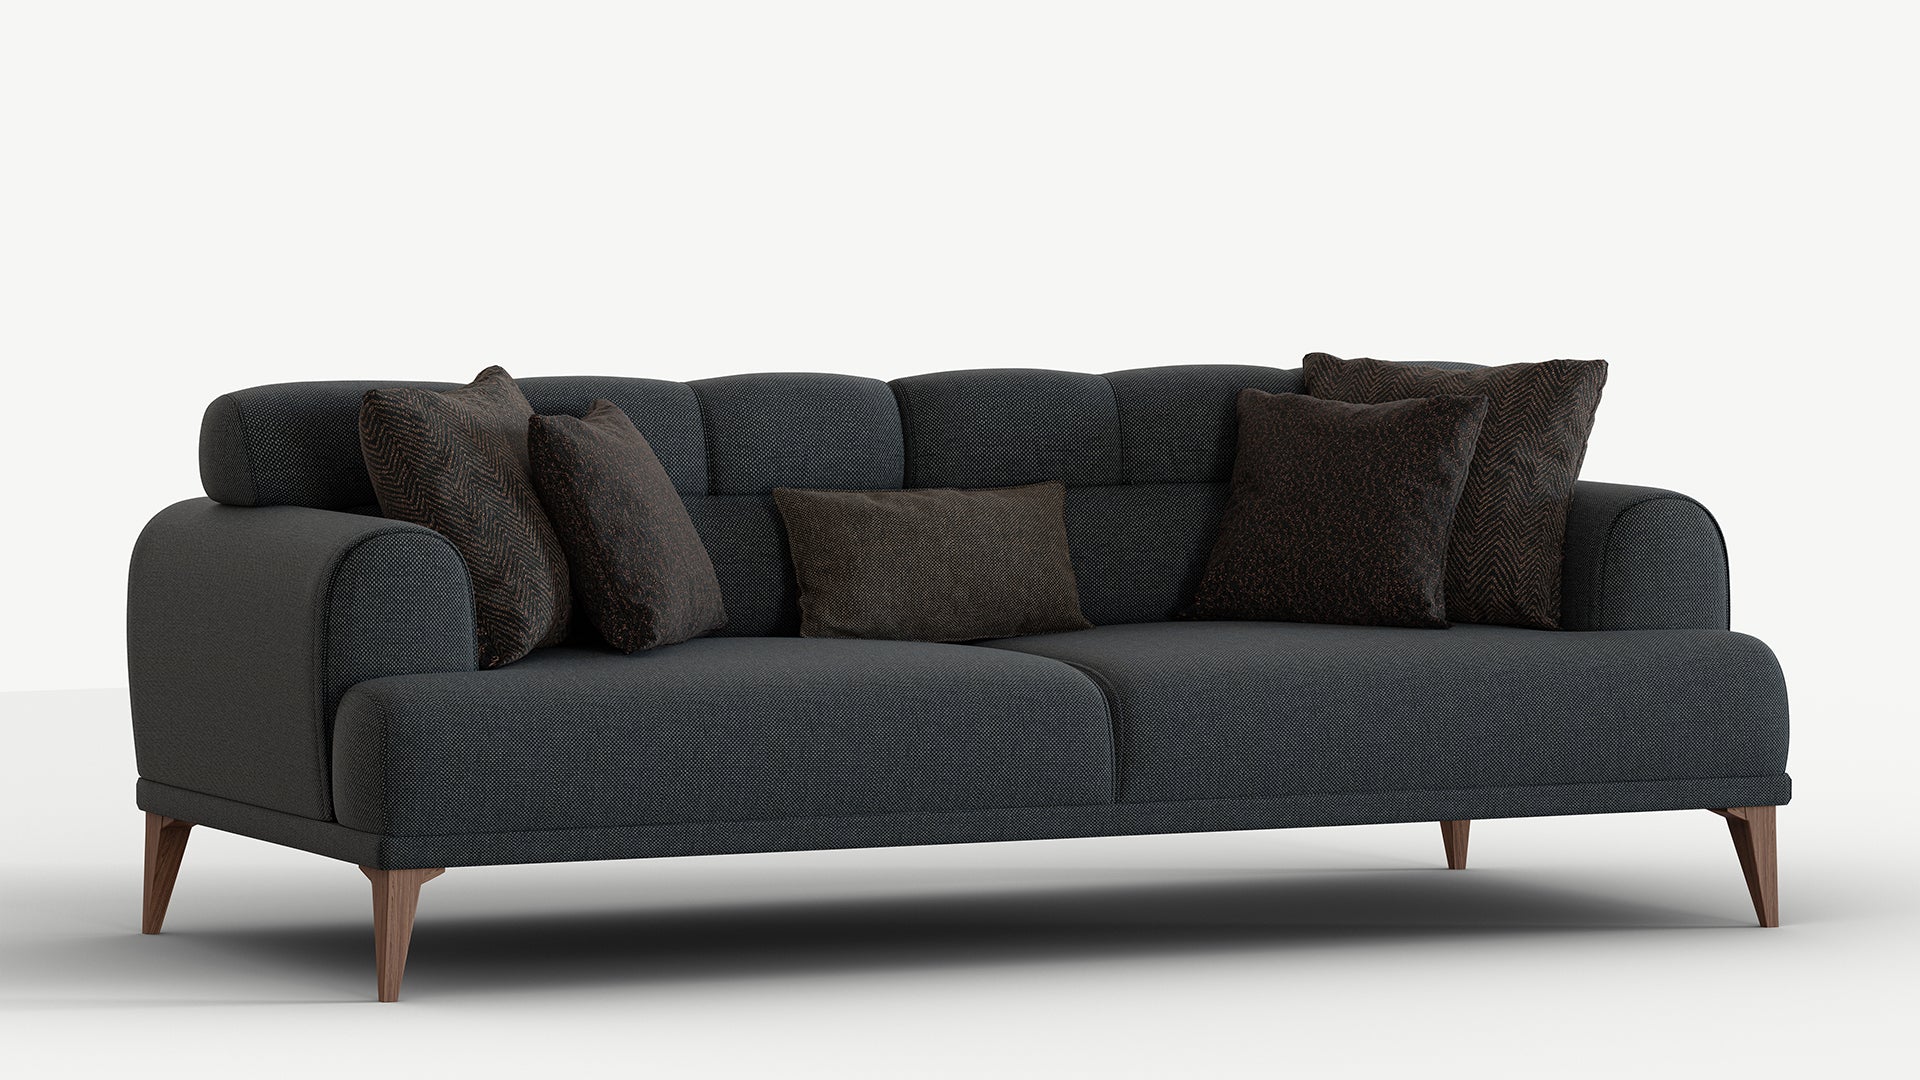 Madrid 3 Seater Sofa Bed